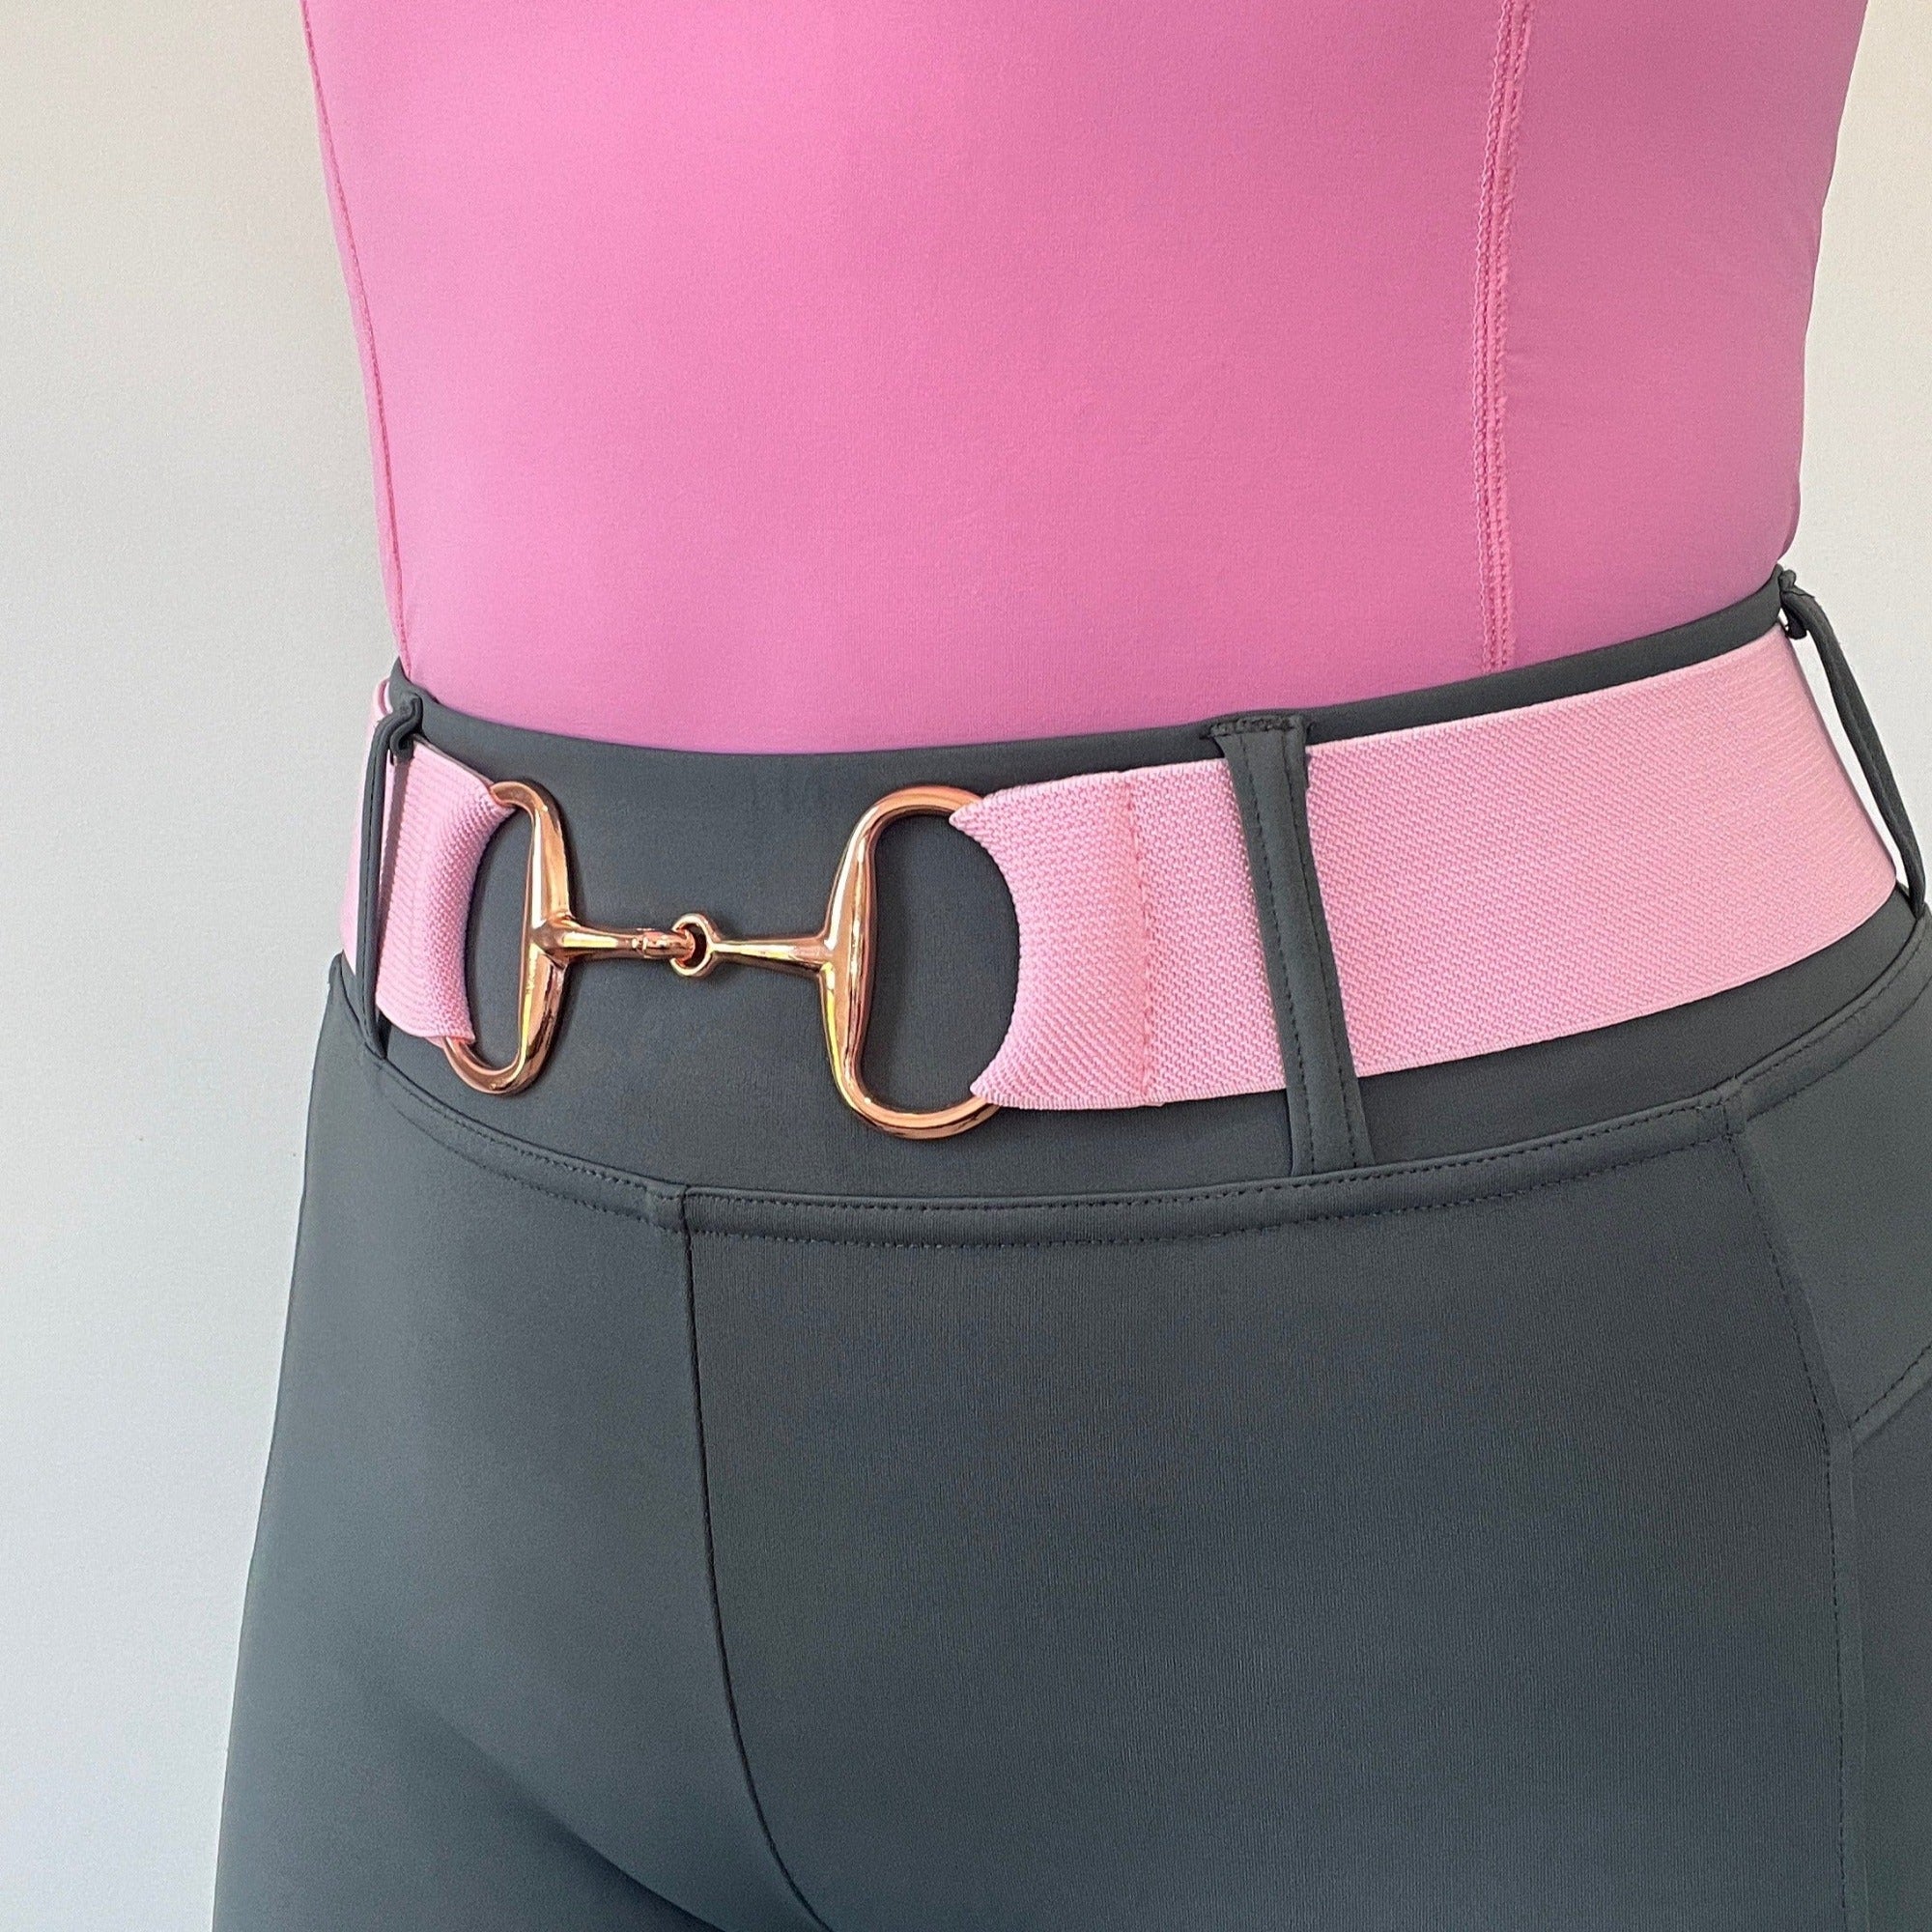 Snaffle Stretch Belt in pink with rose gold buckle